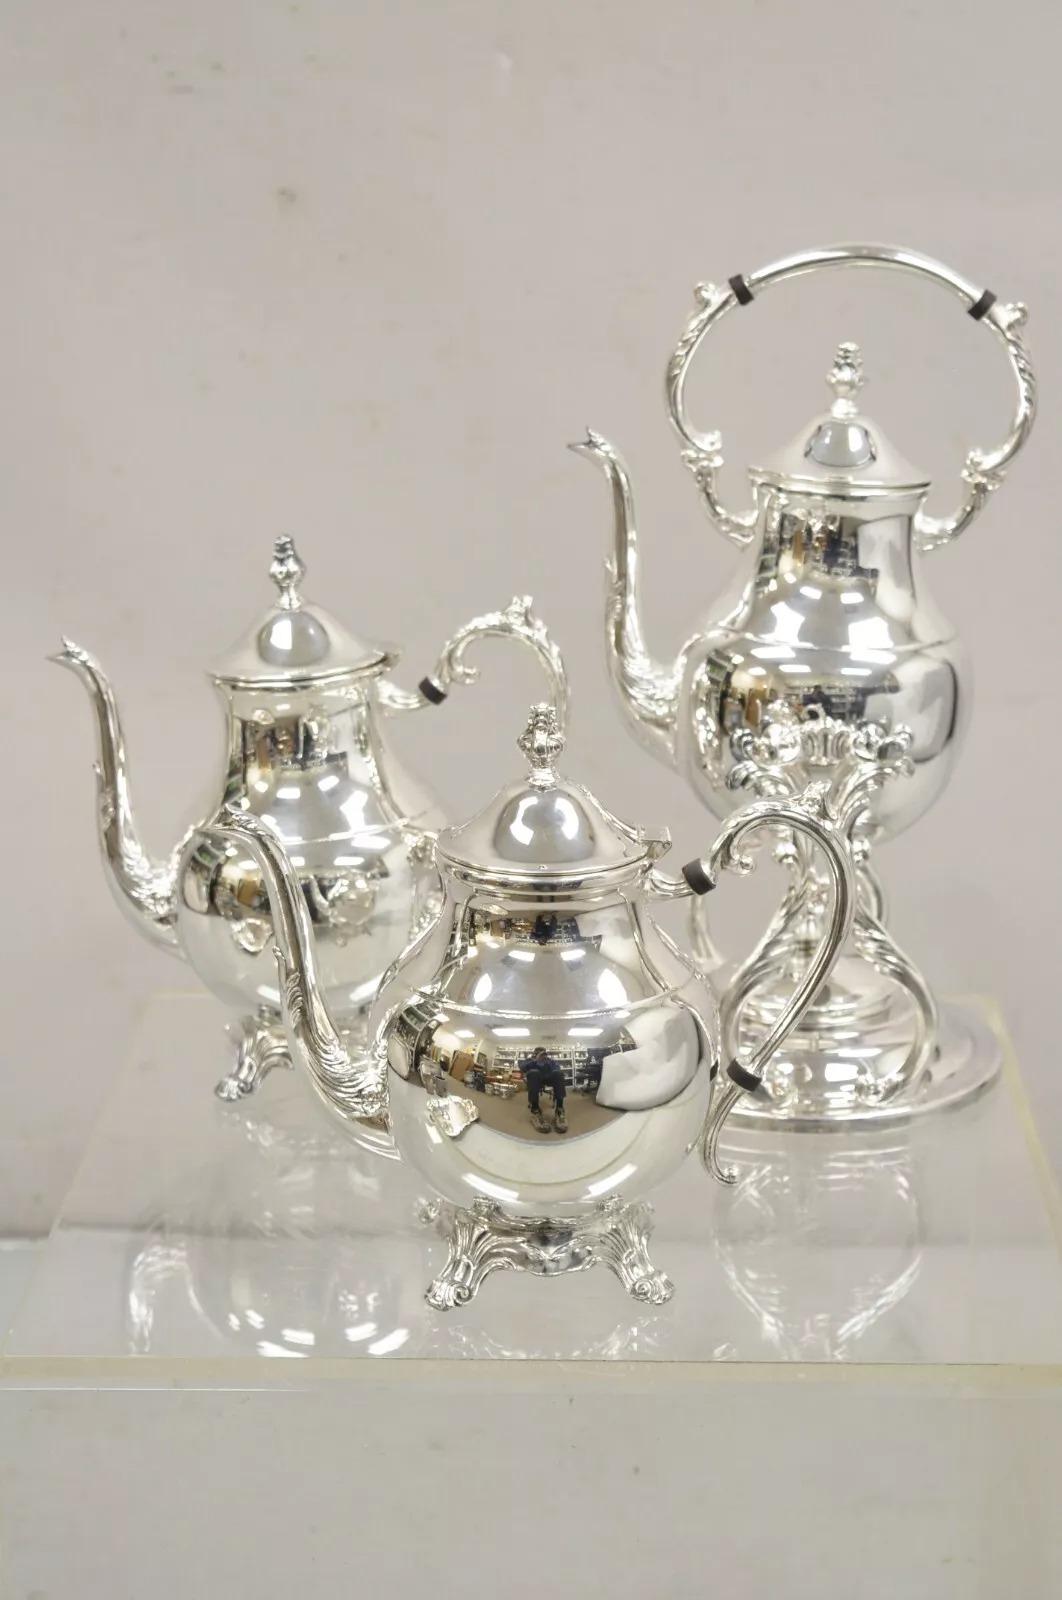 Vintage FB Rogers Victorian Silver Plated Tea Set with Tilting Pot - 6 Pc Set In Good Condition For Sale In Philadelphia, PA